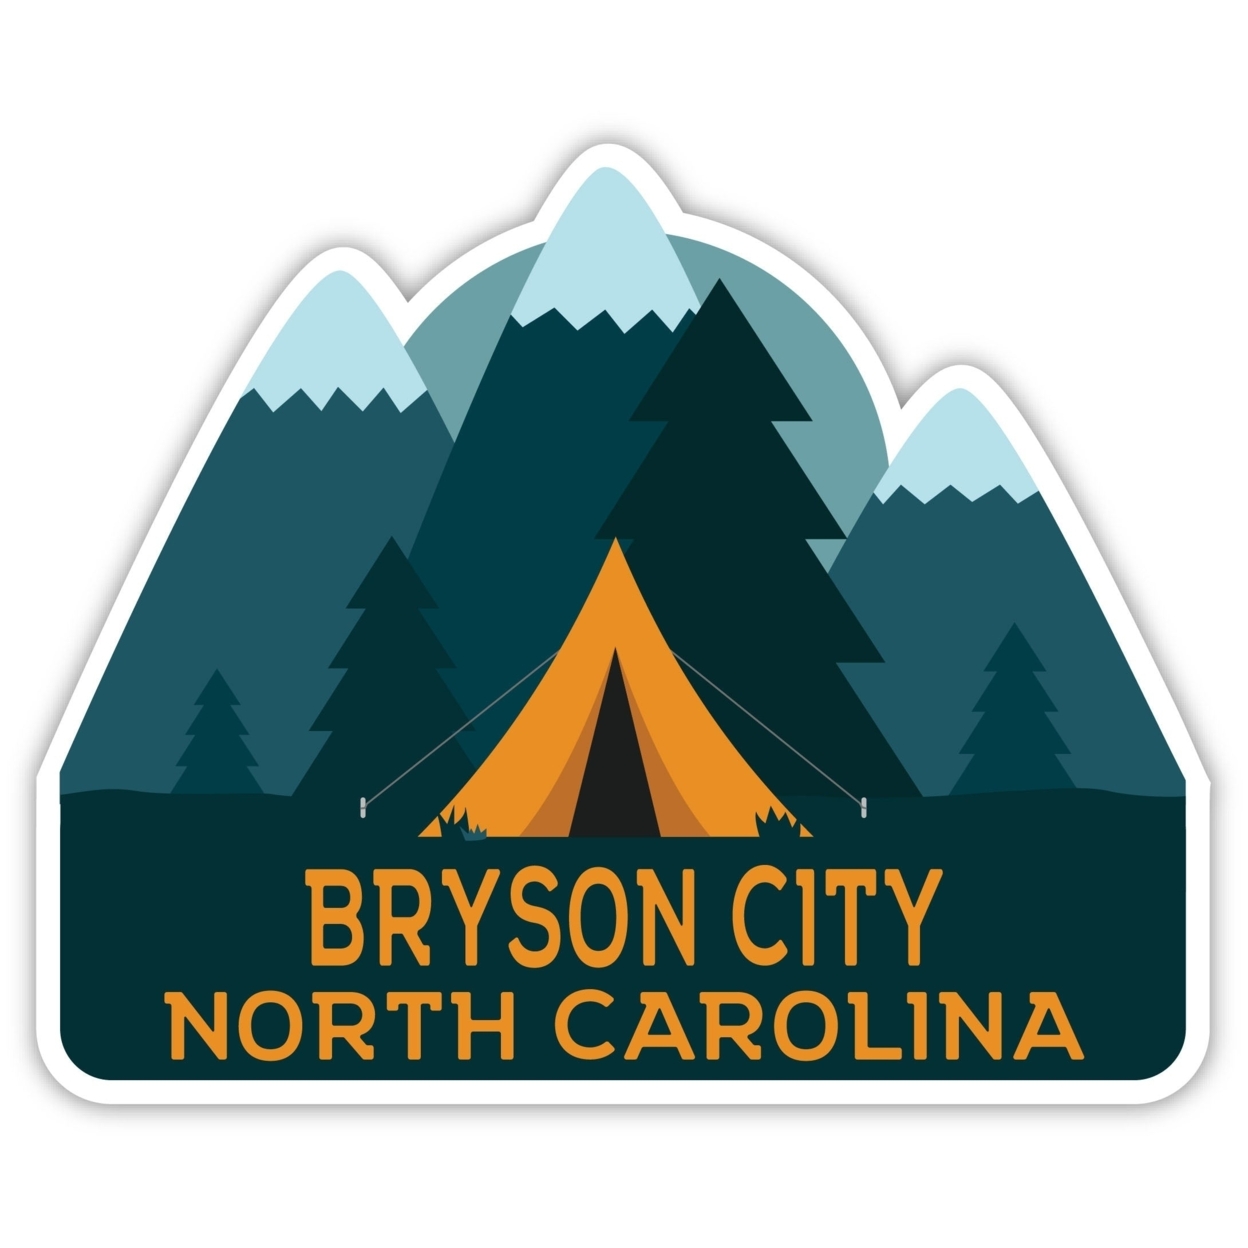 Bryson City North Carolina Souvenir Decorative Stickers (Choose Theme And Size) - 4-Pack, 12-Inch, Adventures Awaits